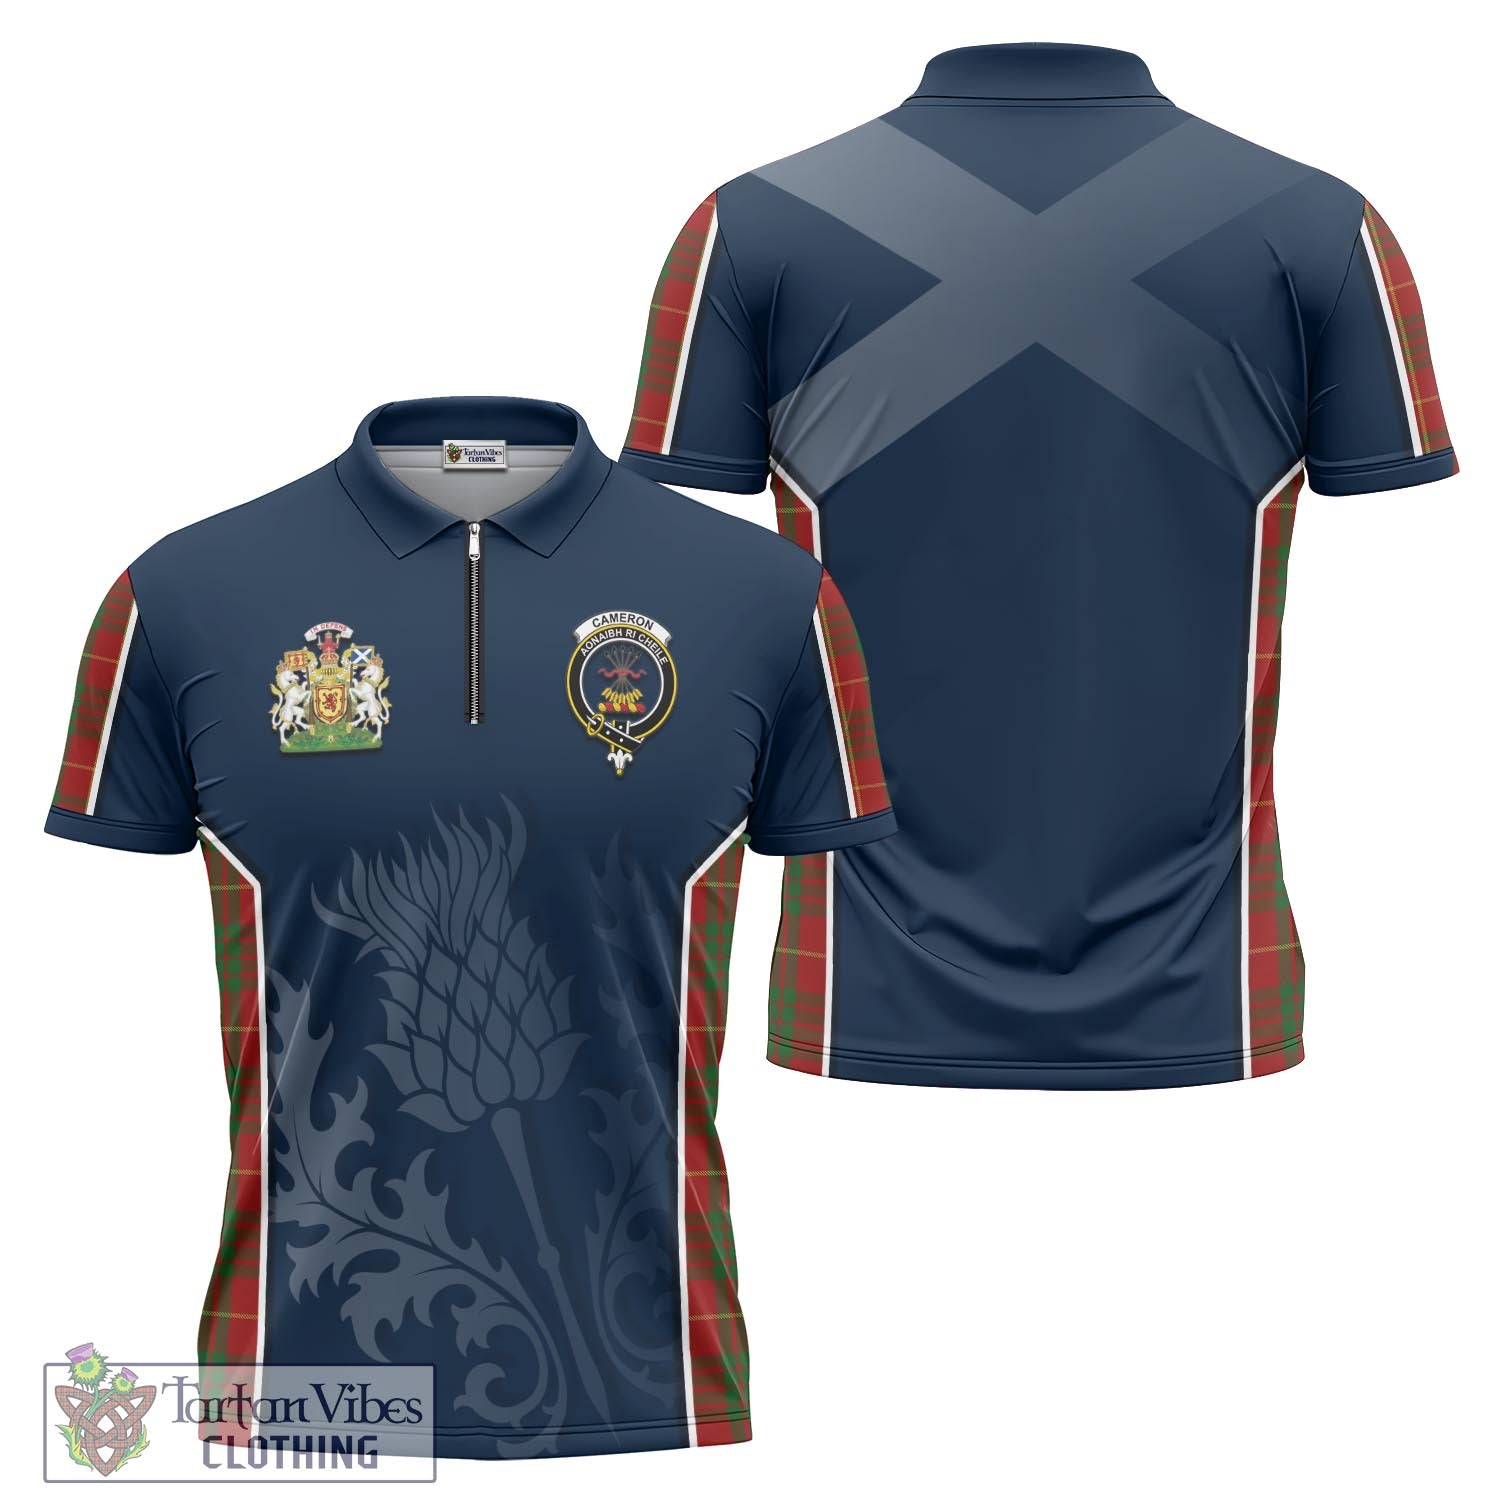 Tartan Vibes Clothing Cameron Tartan Zipper Polo Shirt with Family Crest and Scottish Thistle Vibes Sport Style